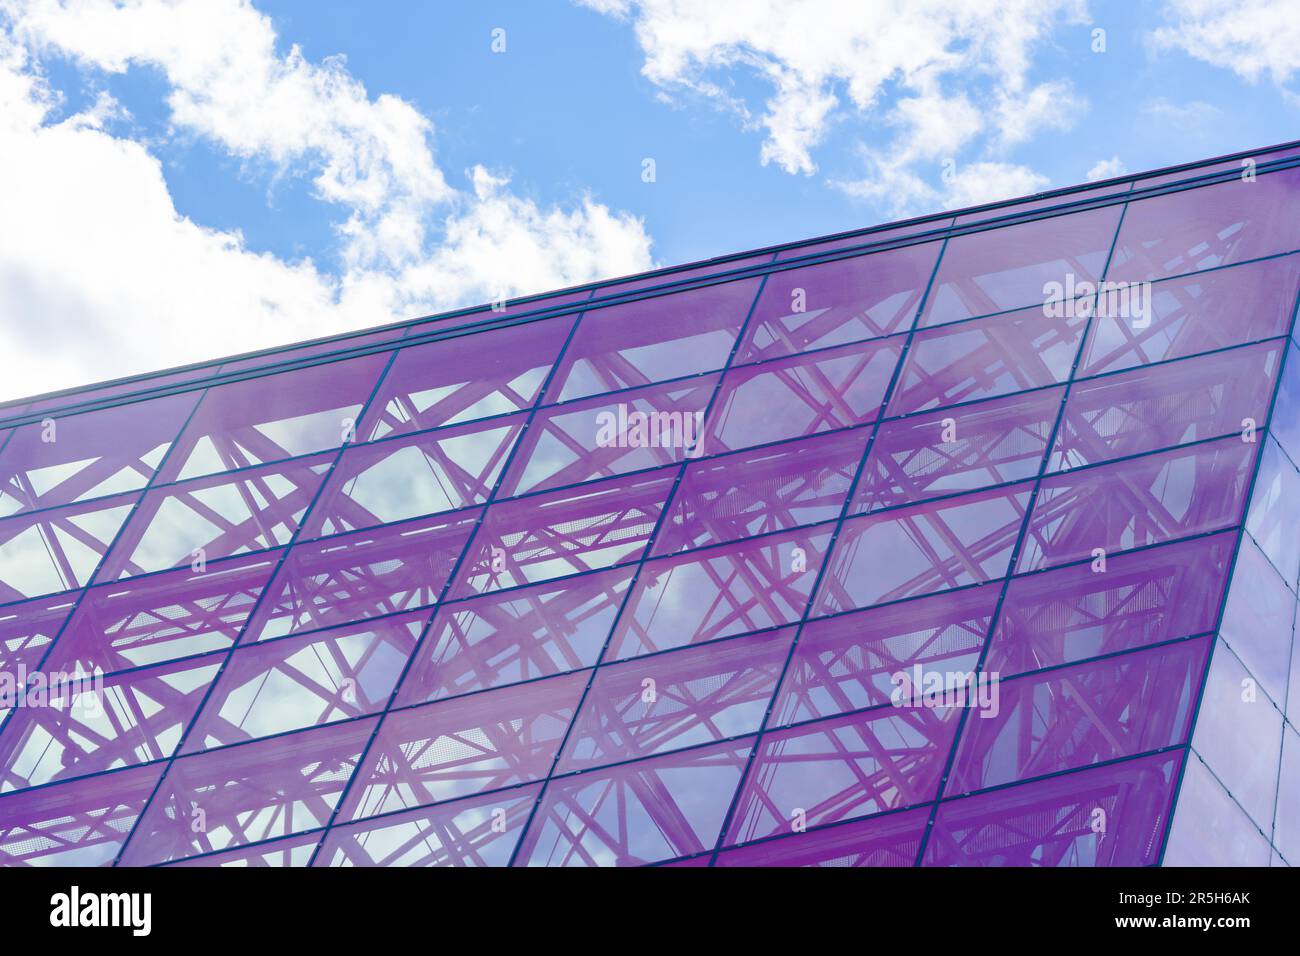 Stylish Glass Facade of Violet Tinted Semi-Transparent Glass Building Against Blue Sky with Sunbeams. Modern Architecture Concept Stock Photo